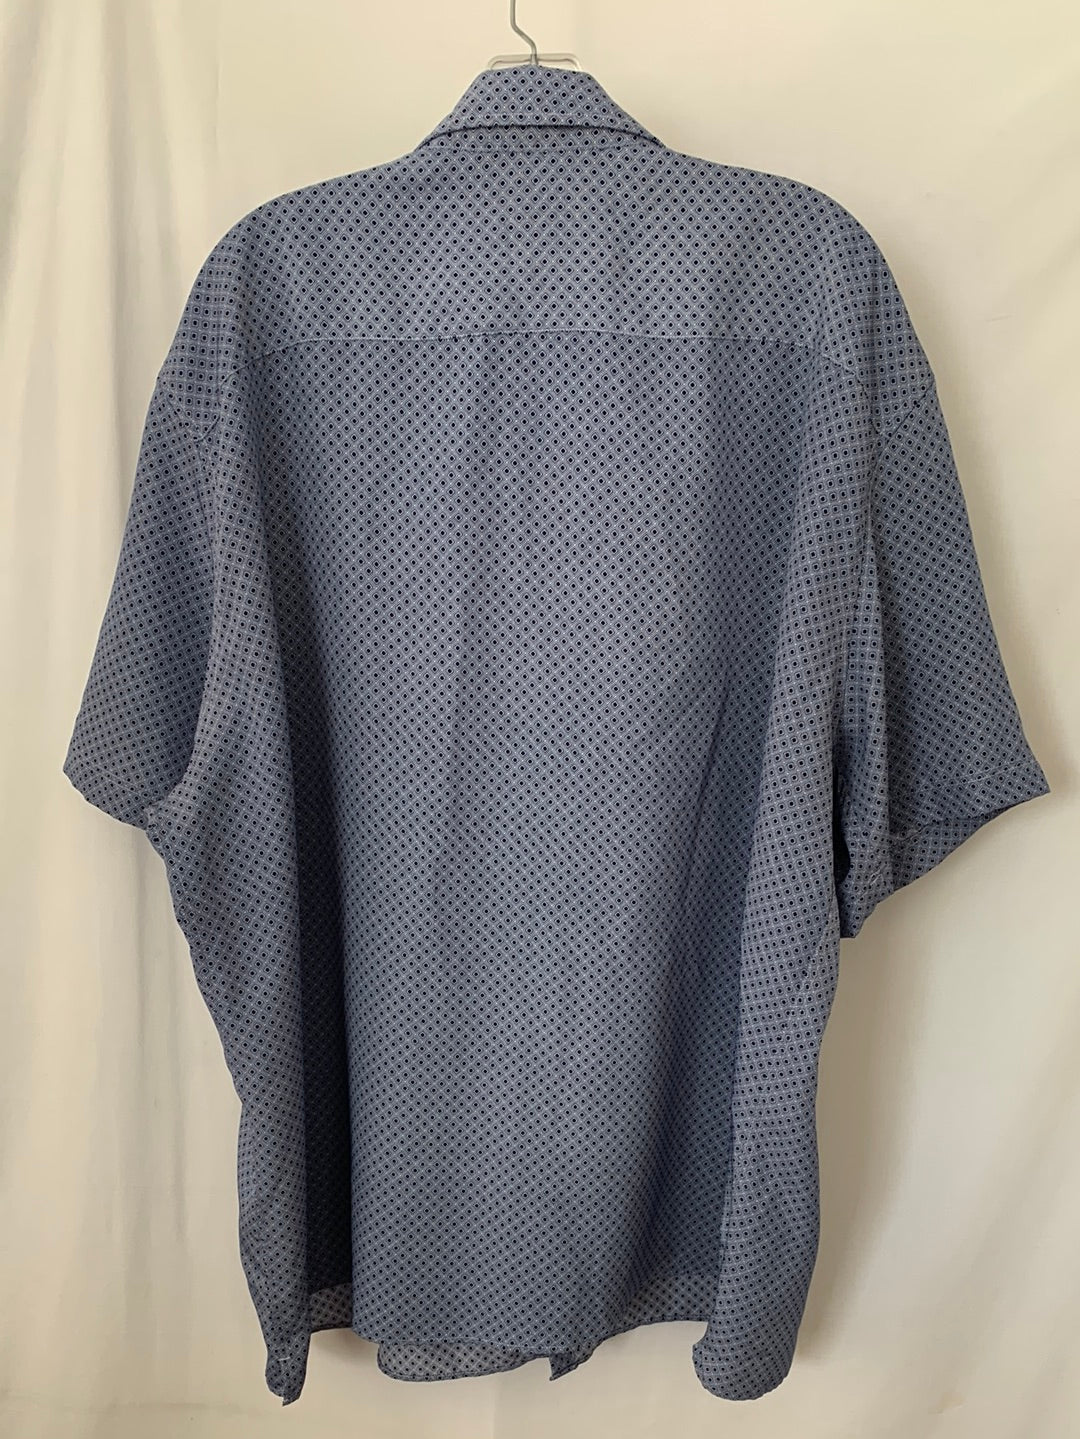 M&S Collection MARKS SPENCER blue print Easy Care Button Up Short Sleeve Shirt - XXXL